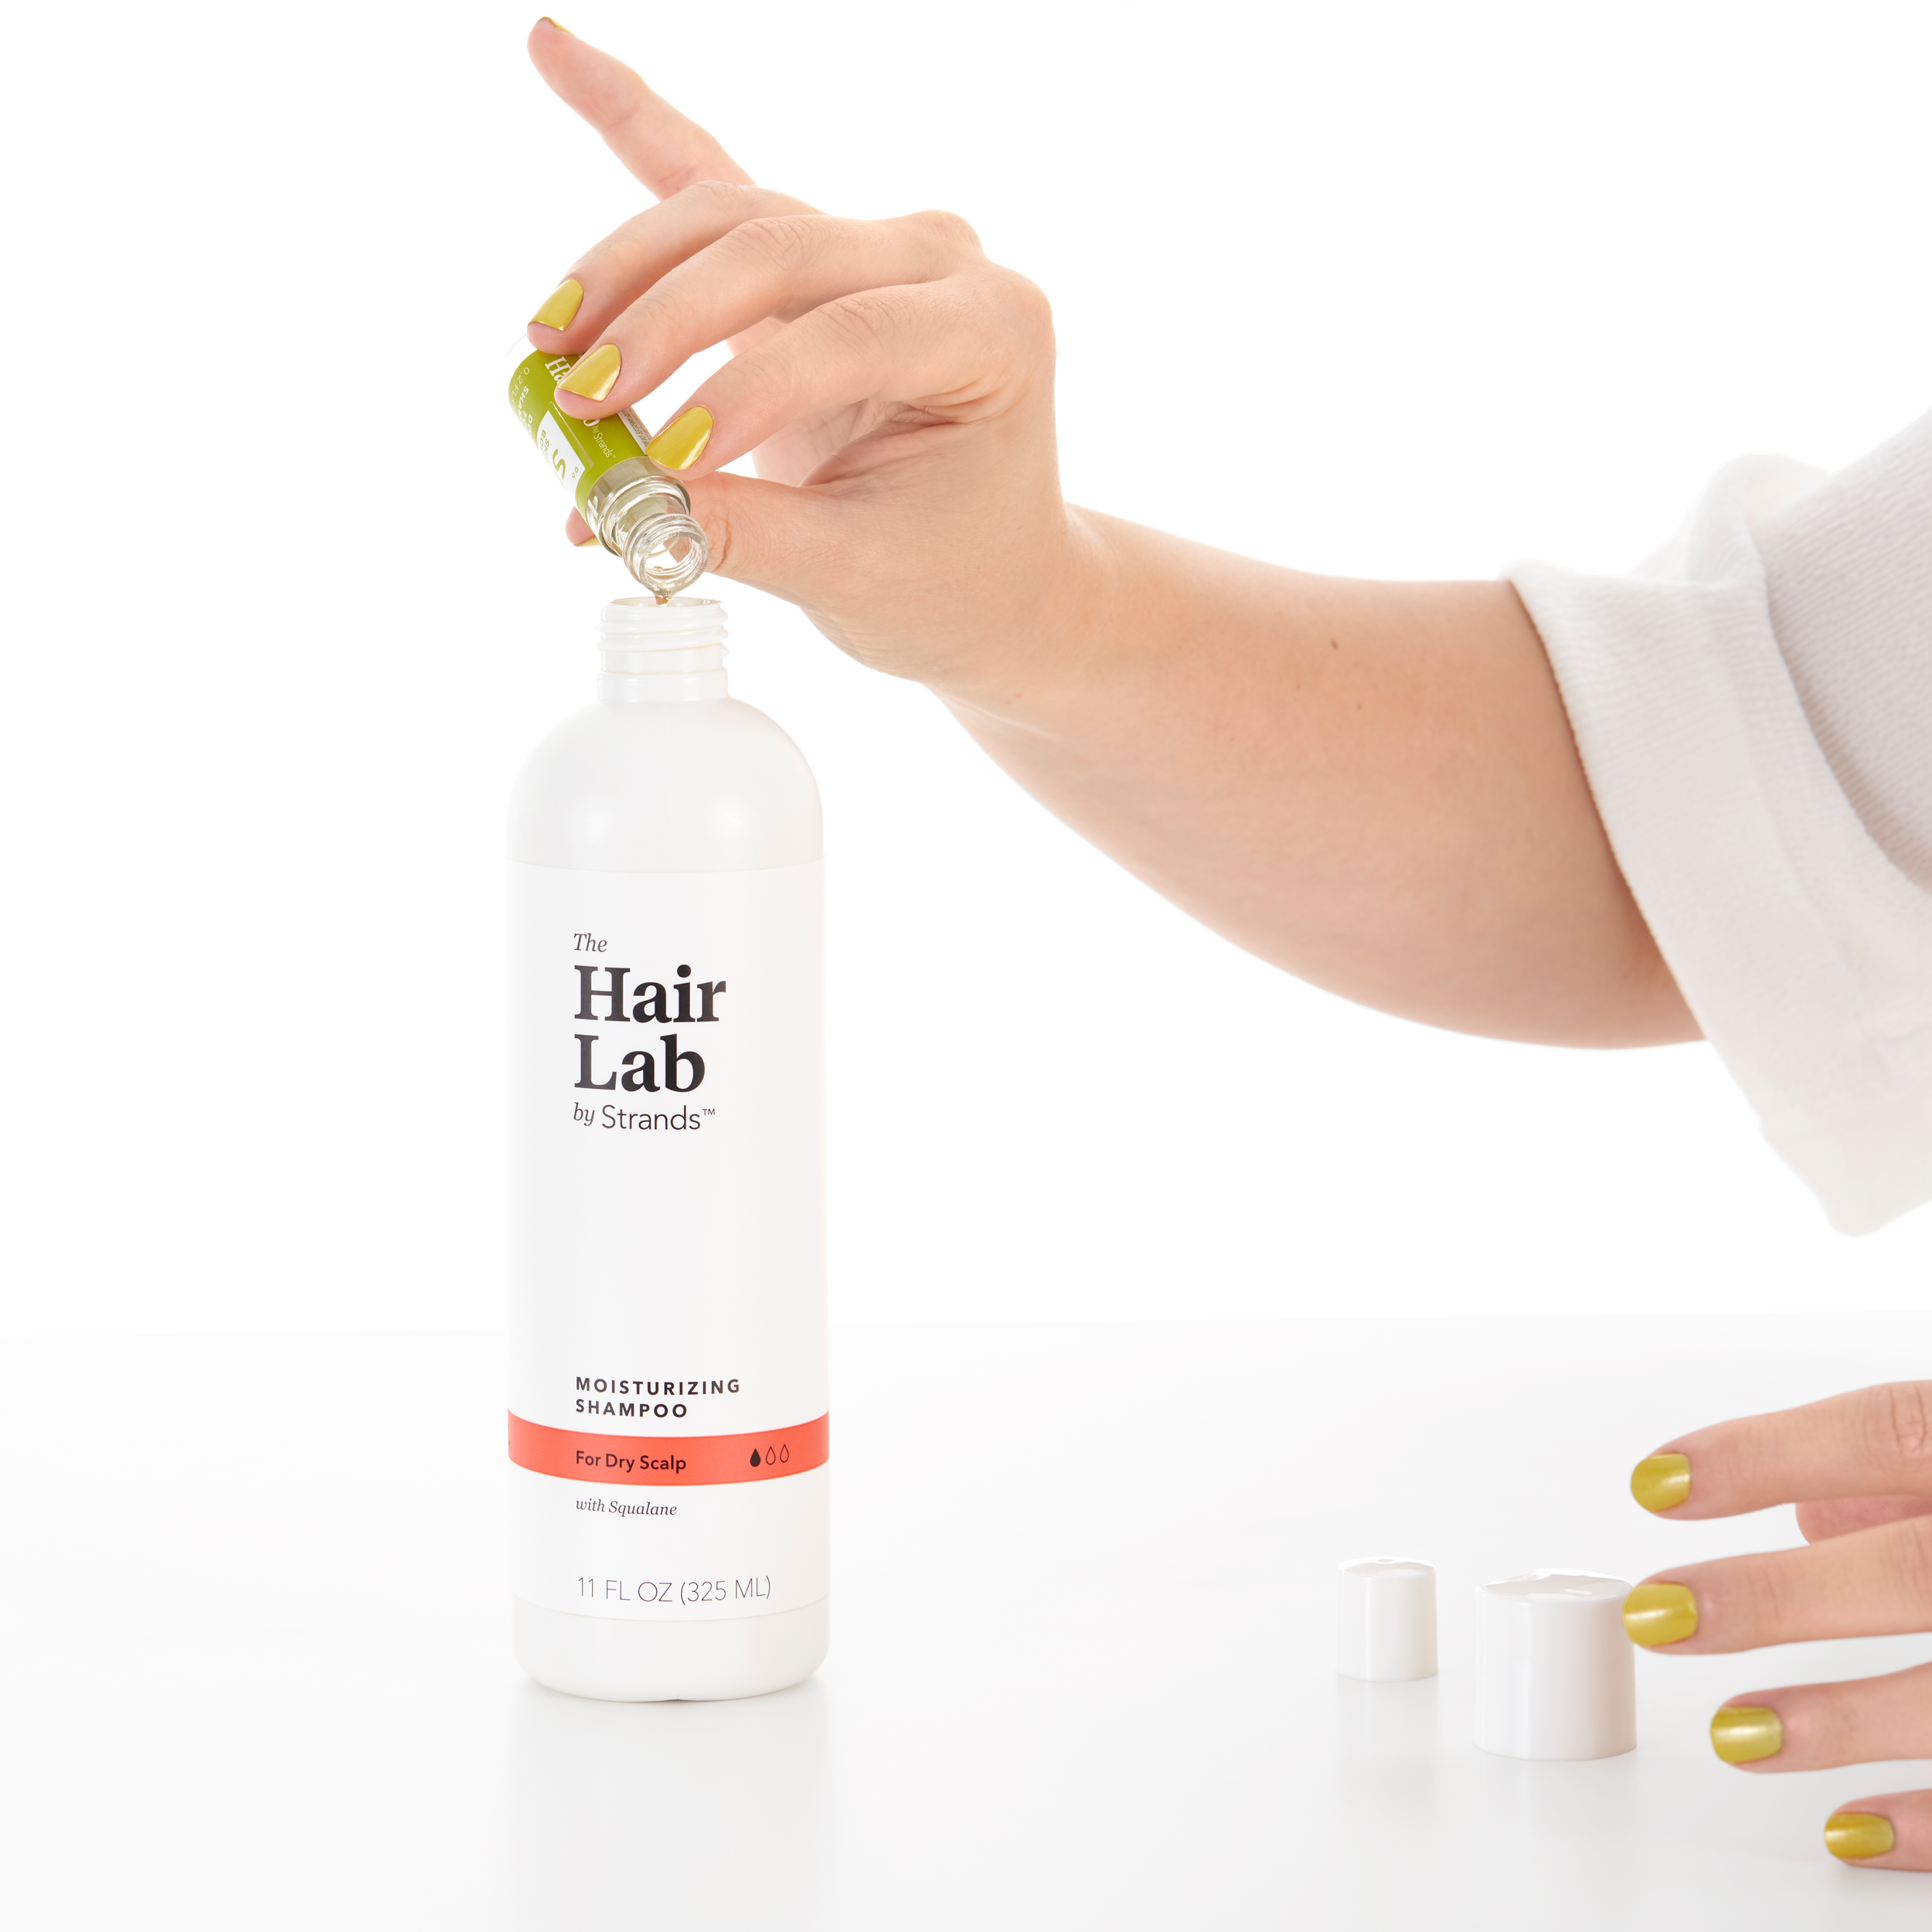 The Hair Lab by Strands personalized hair care dose being poured into paraben-free shampoo